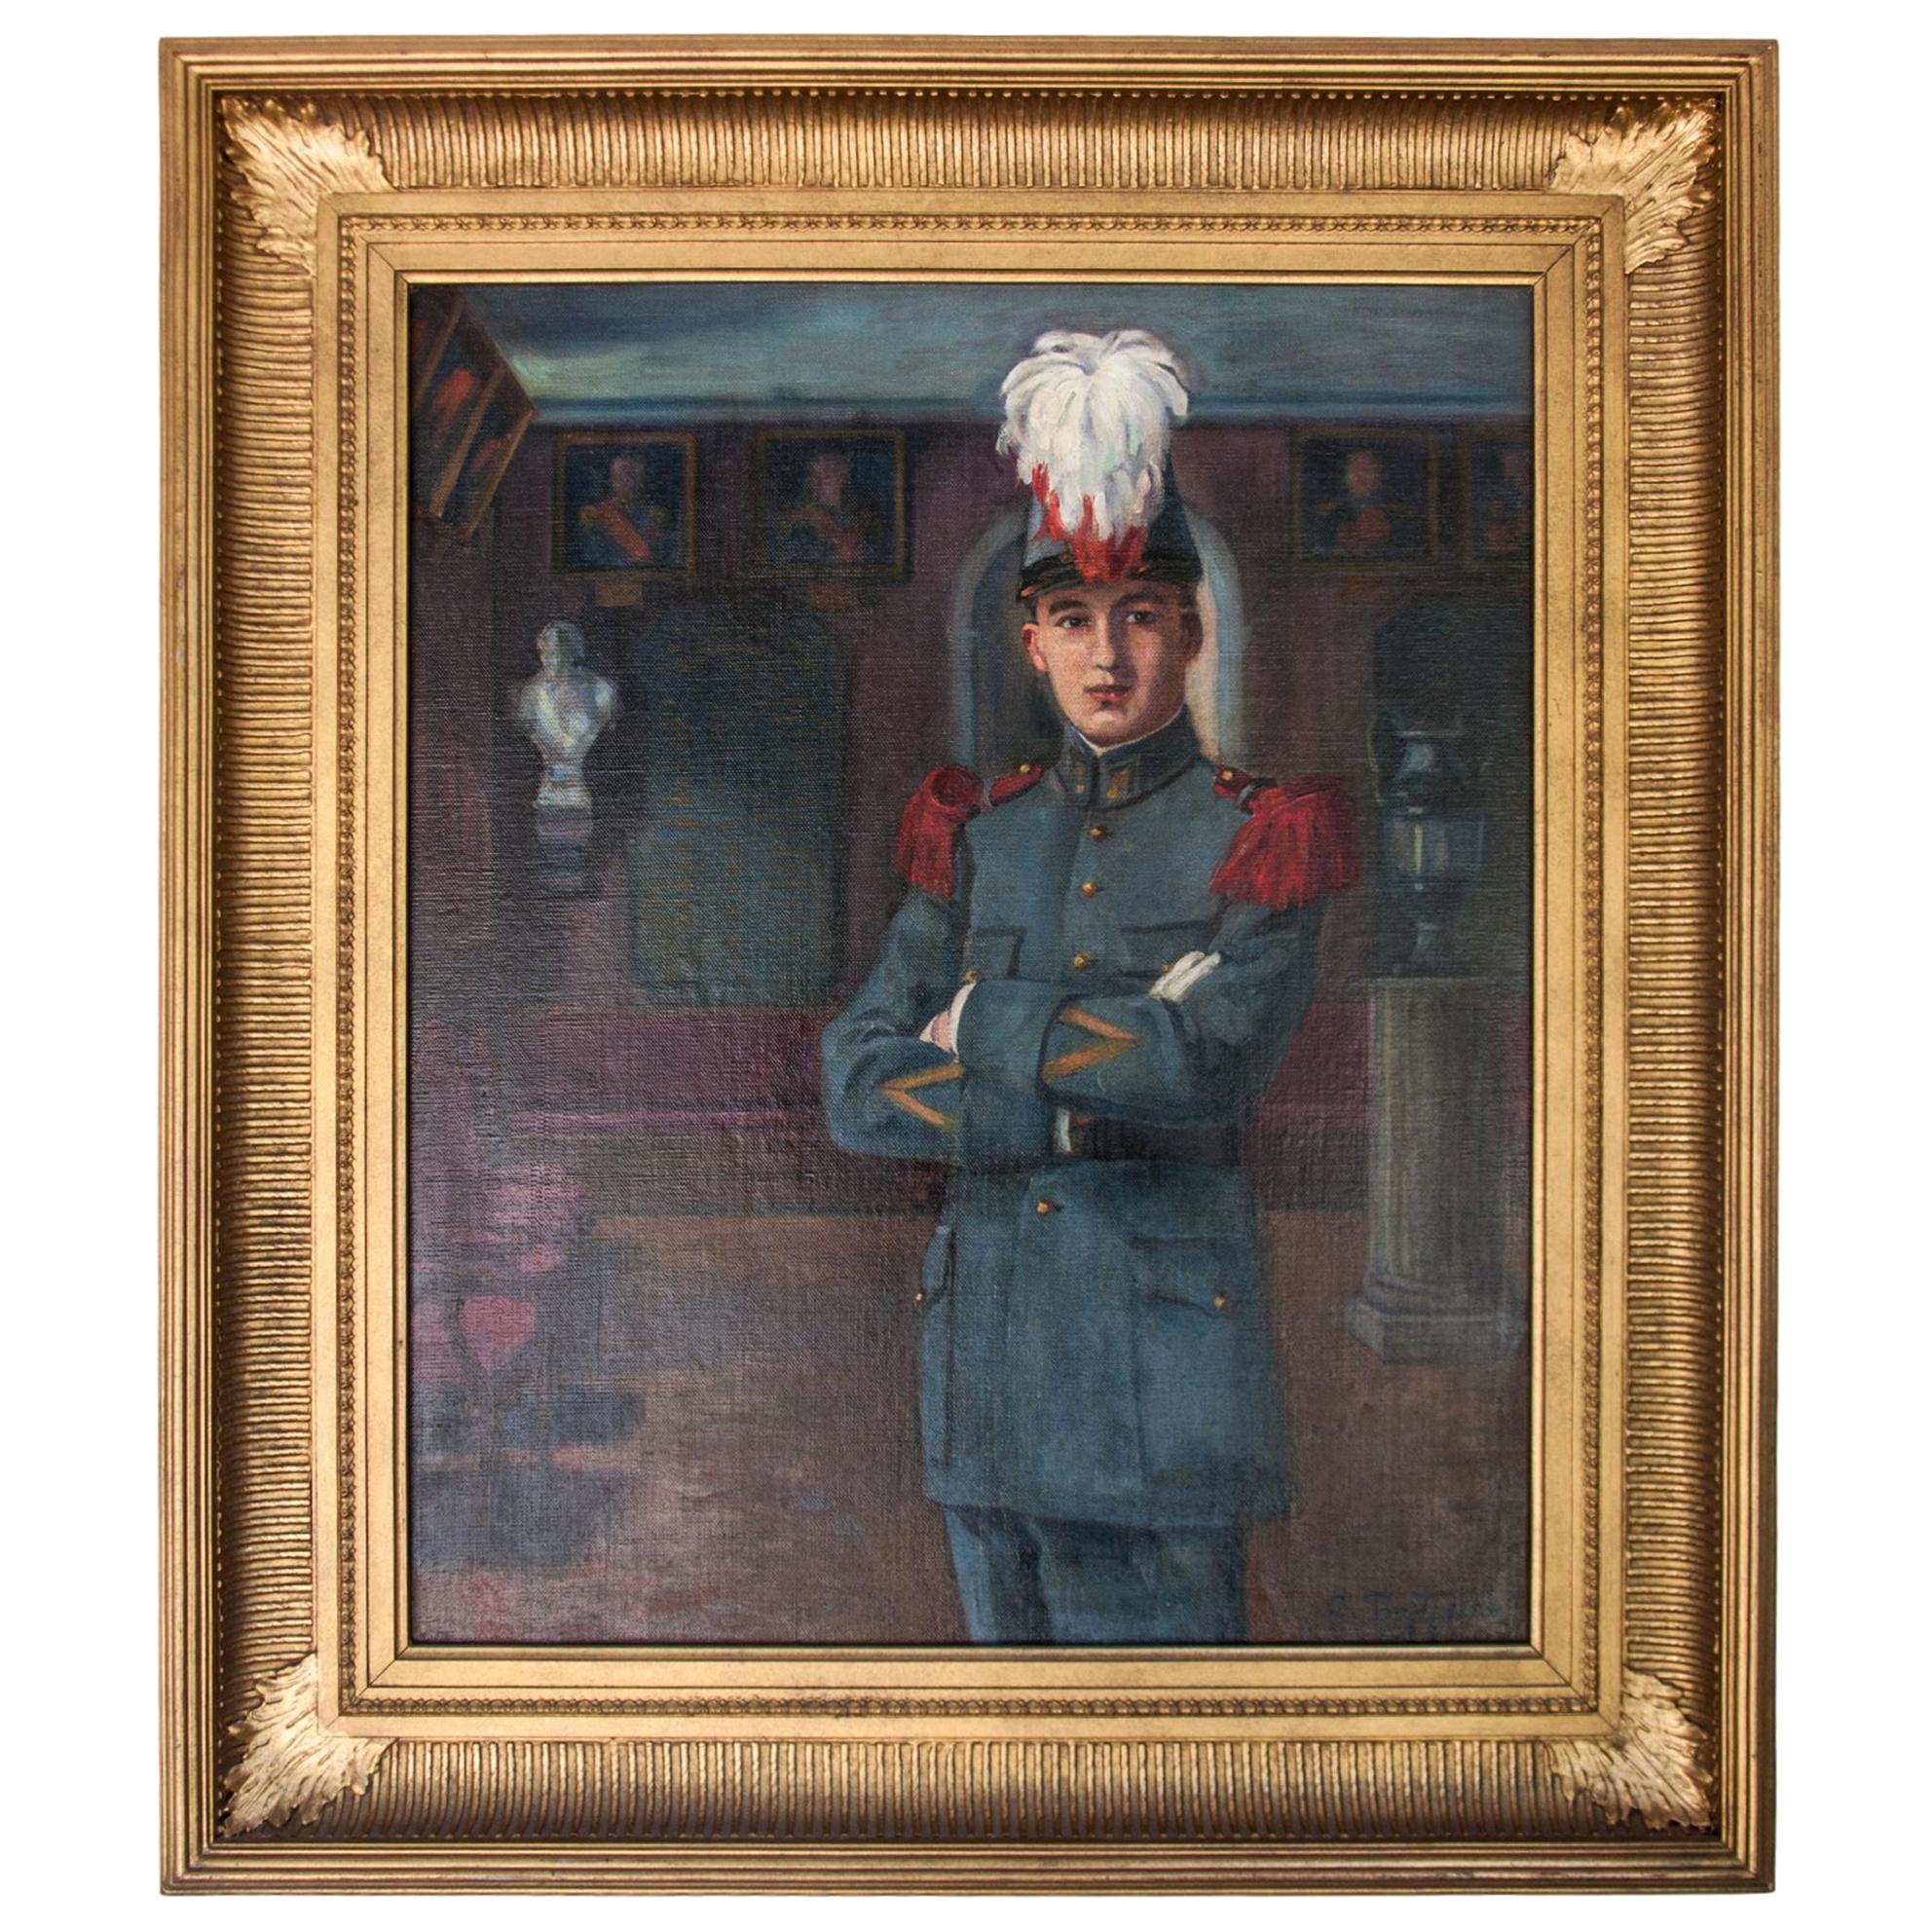 Early 20th Century Oil on Canvas by C Tertiaux, "Boy From Academy", circa 1922